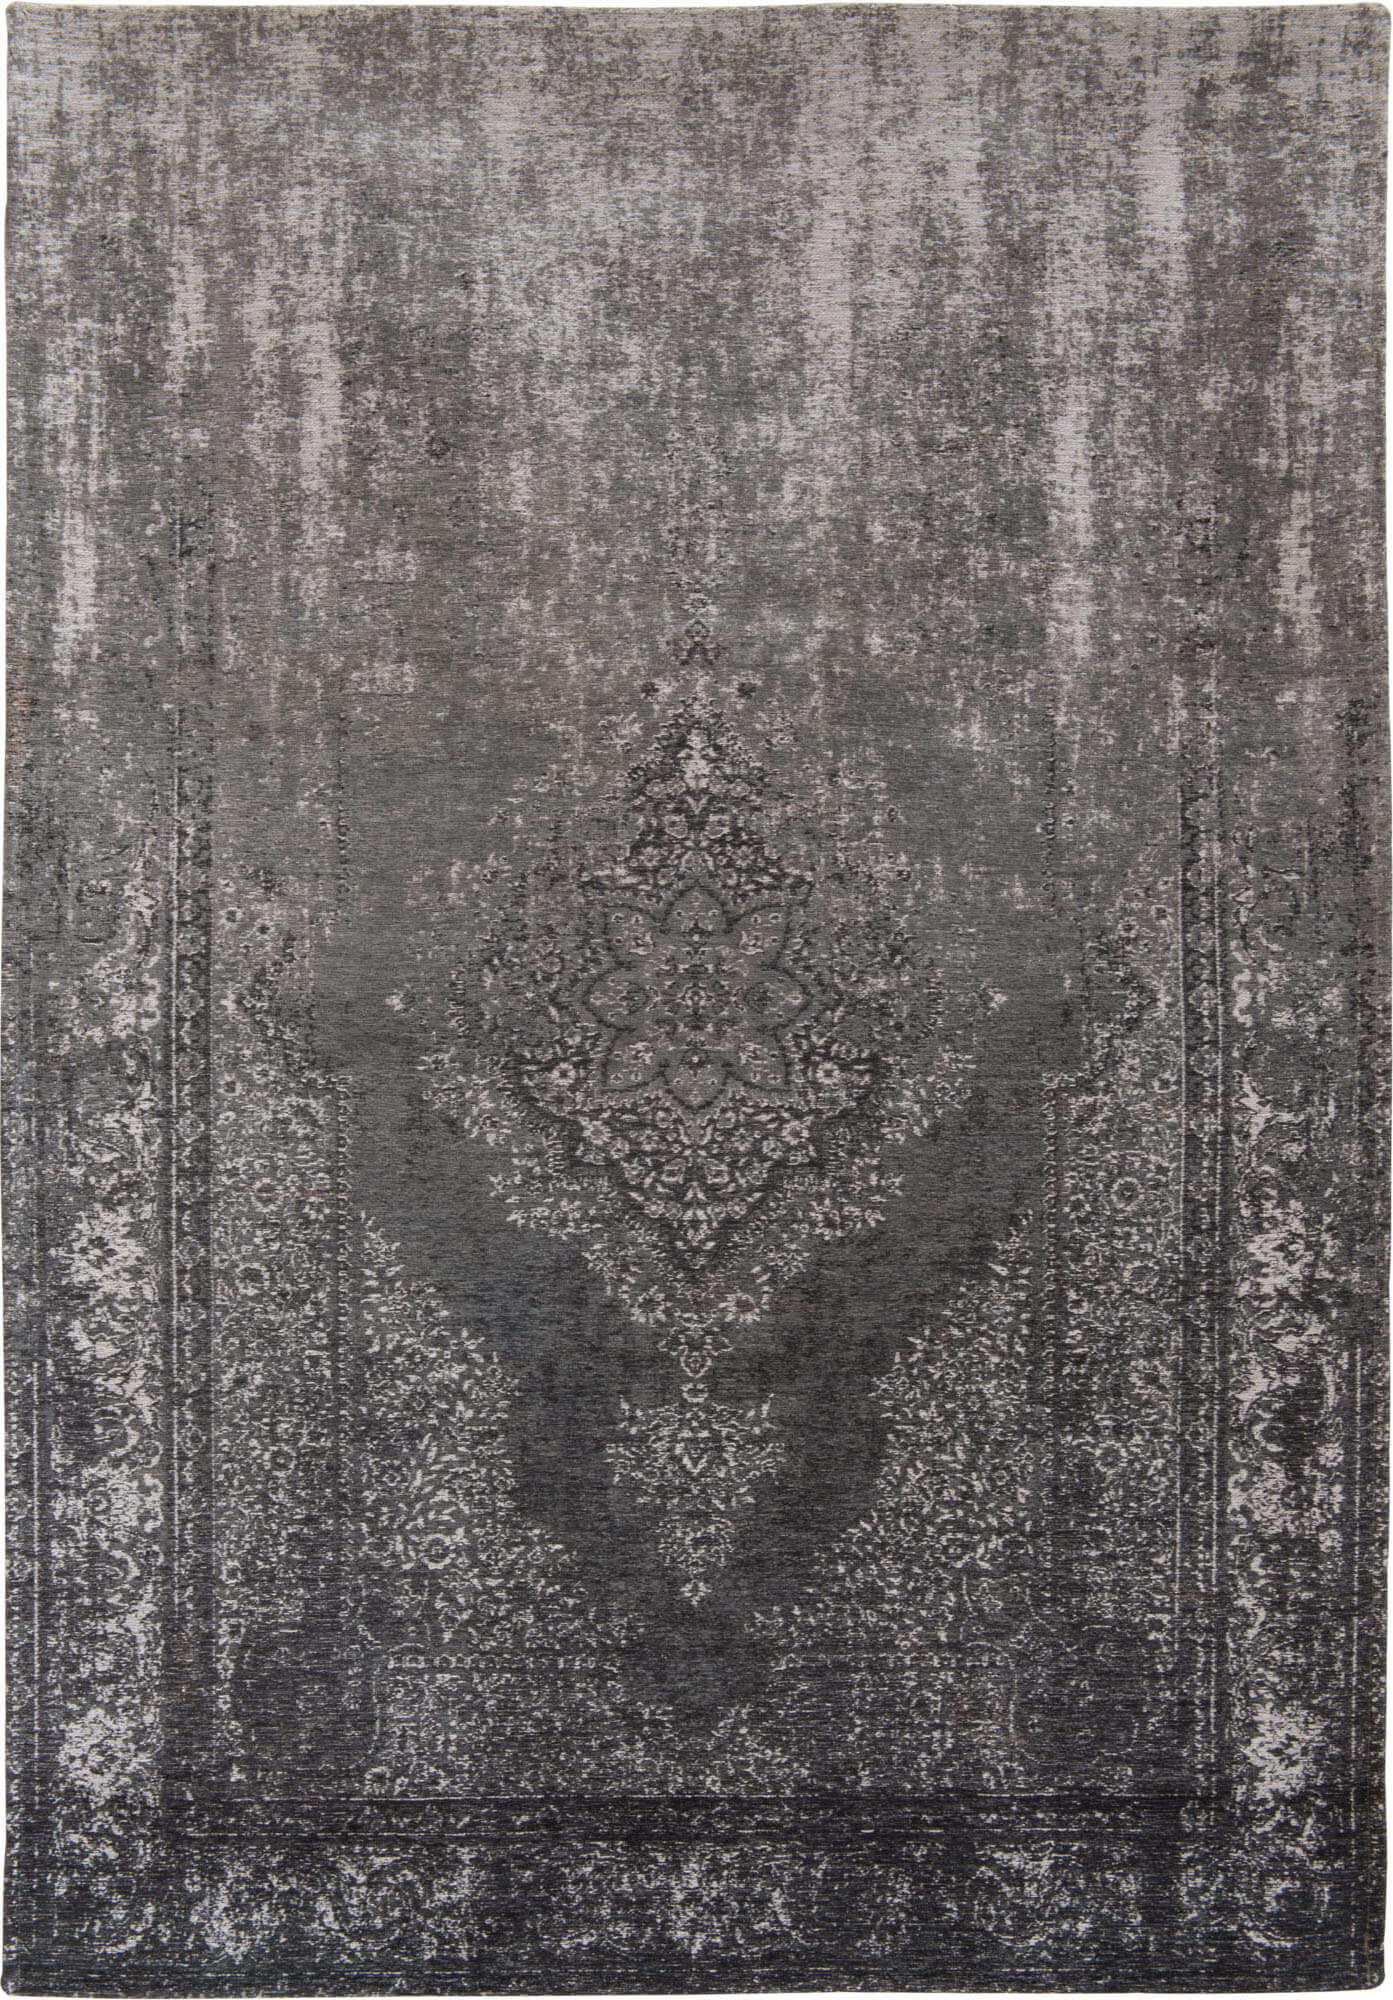 Persian Vintage Style Rug Grey Neutral ☞ Size: 230 x 230 cm